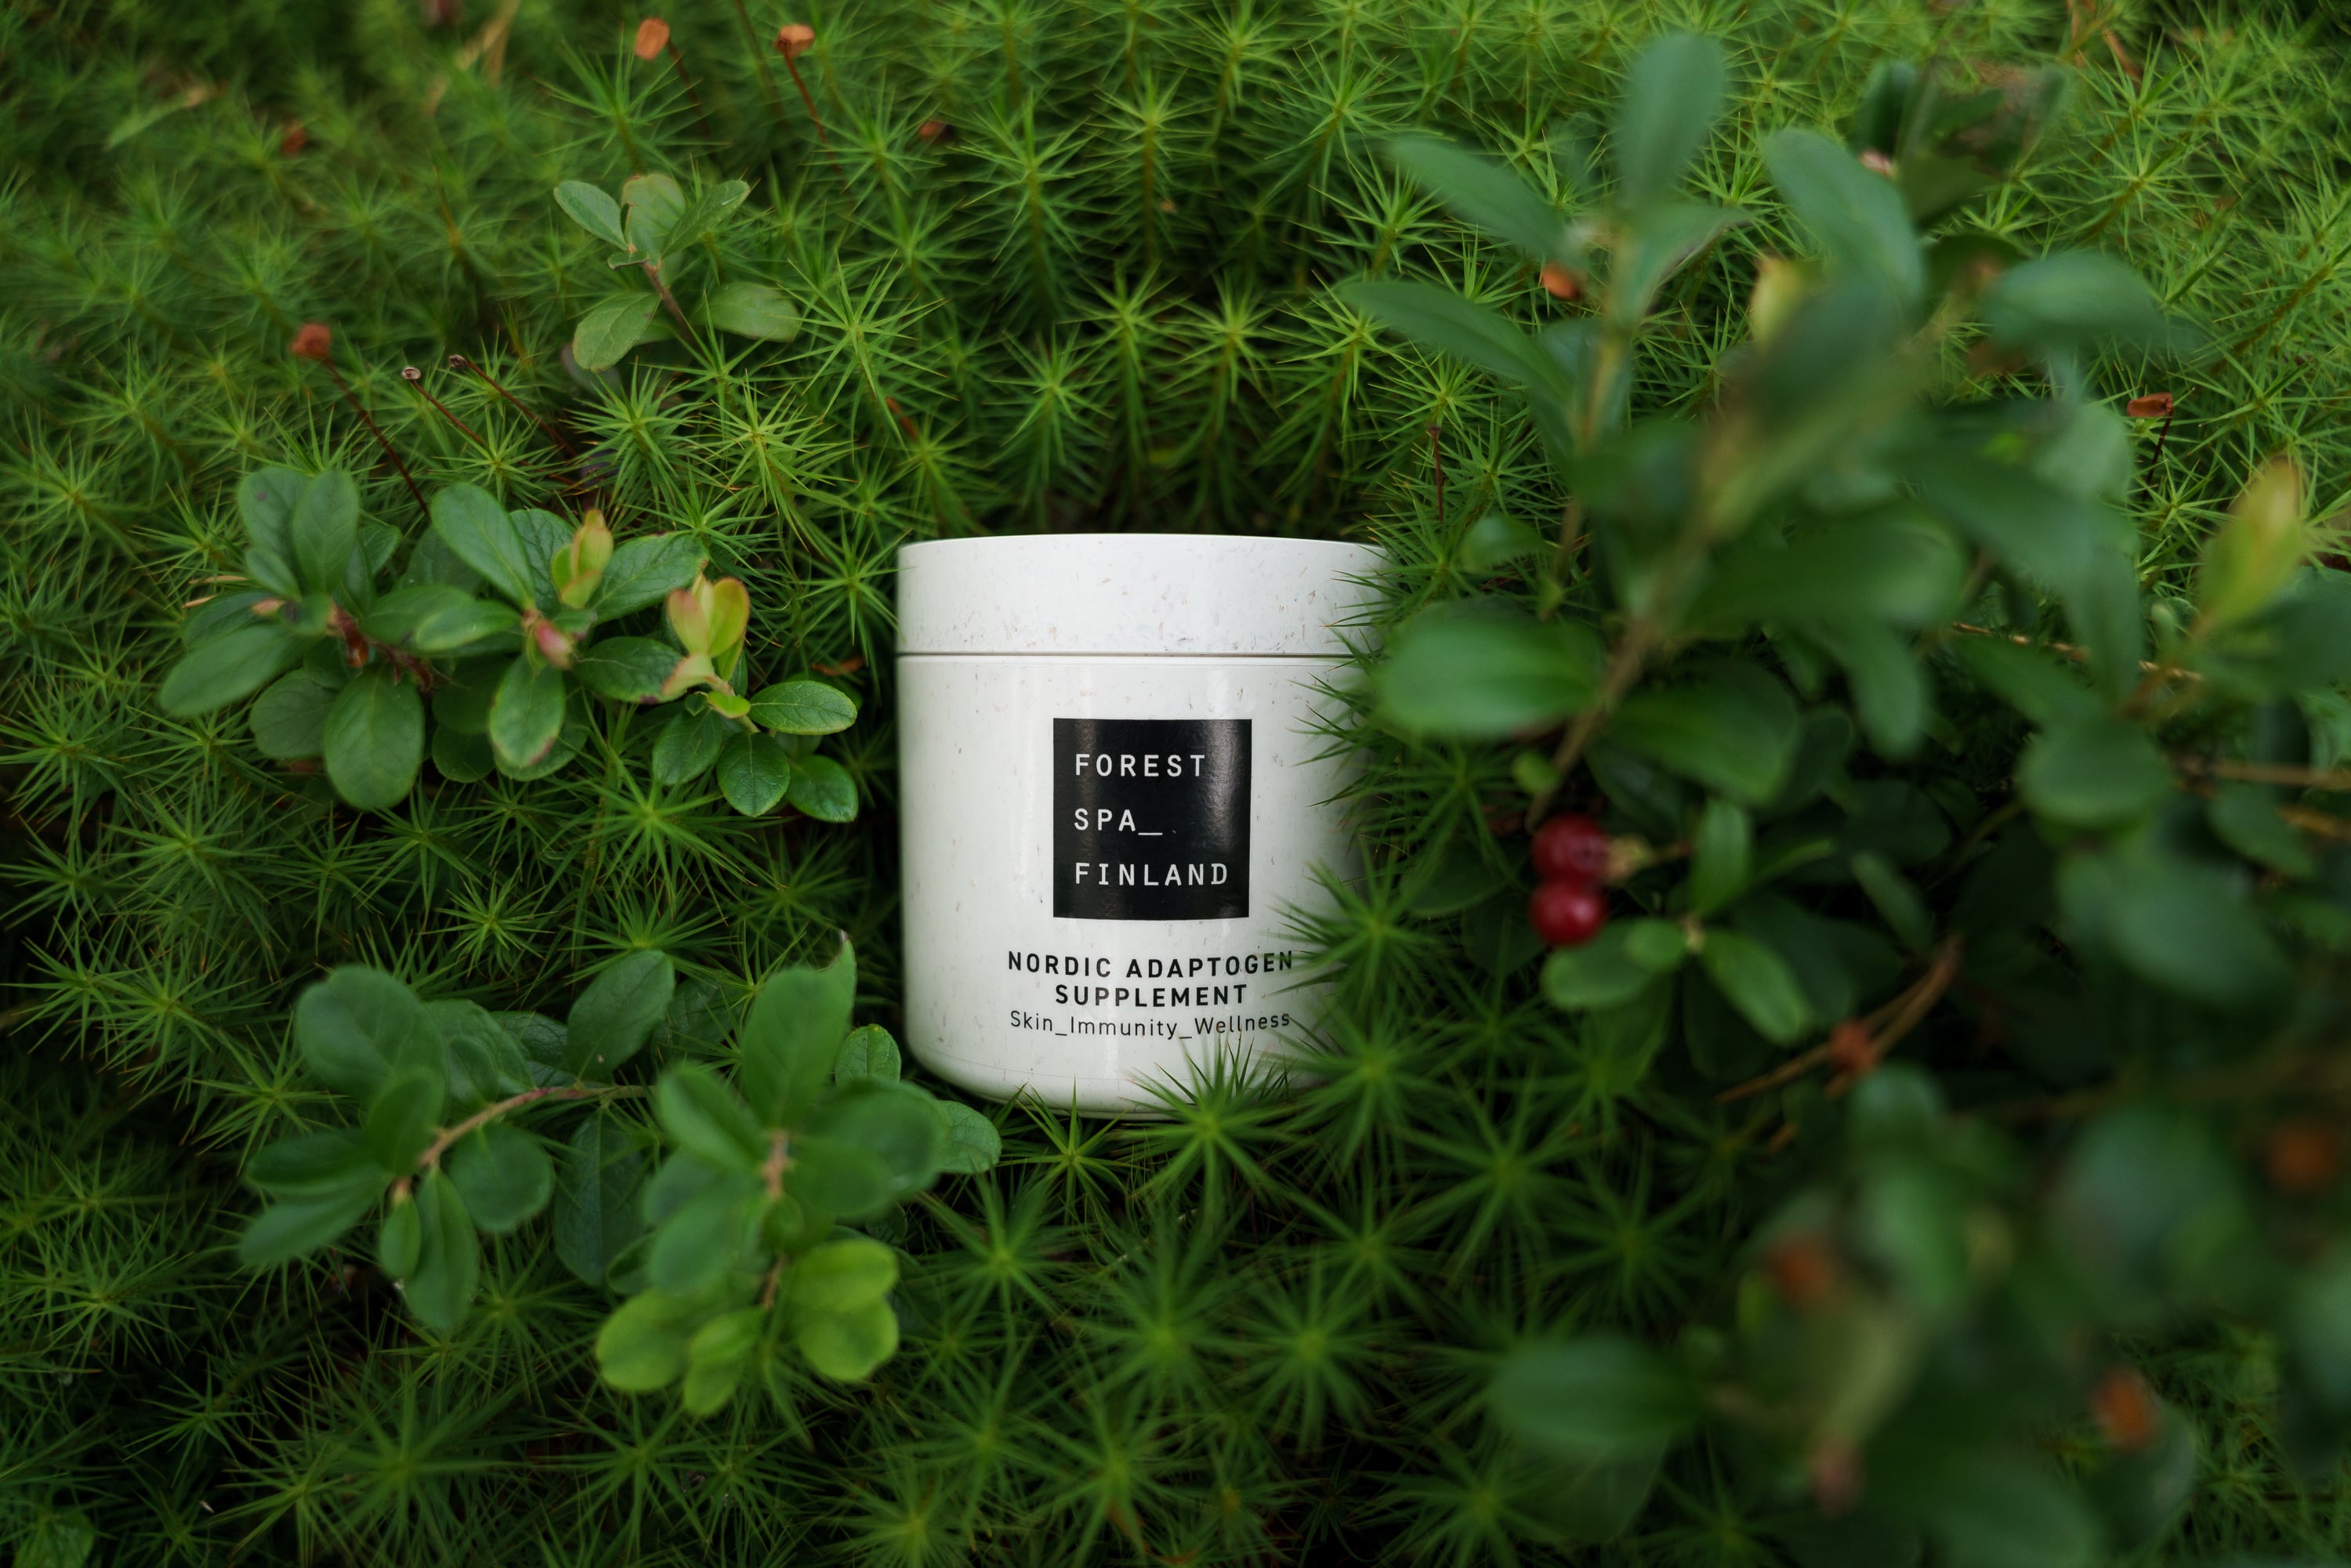 Skin wellness startup Forest Spa Finland using adaptogens in supplements and serum to target skin health